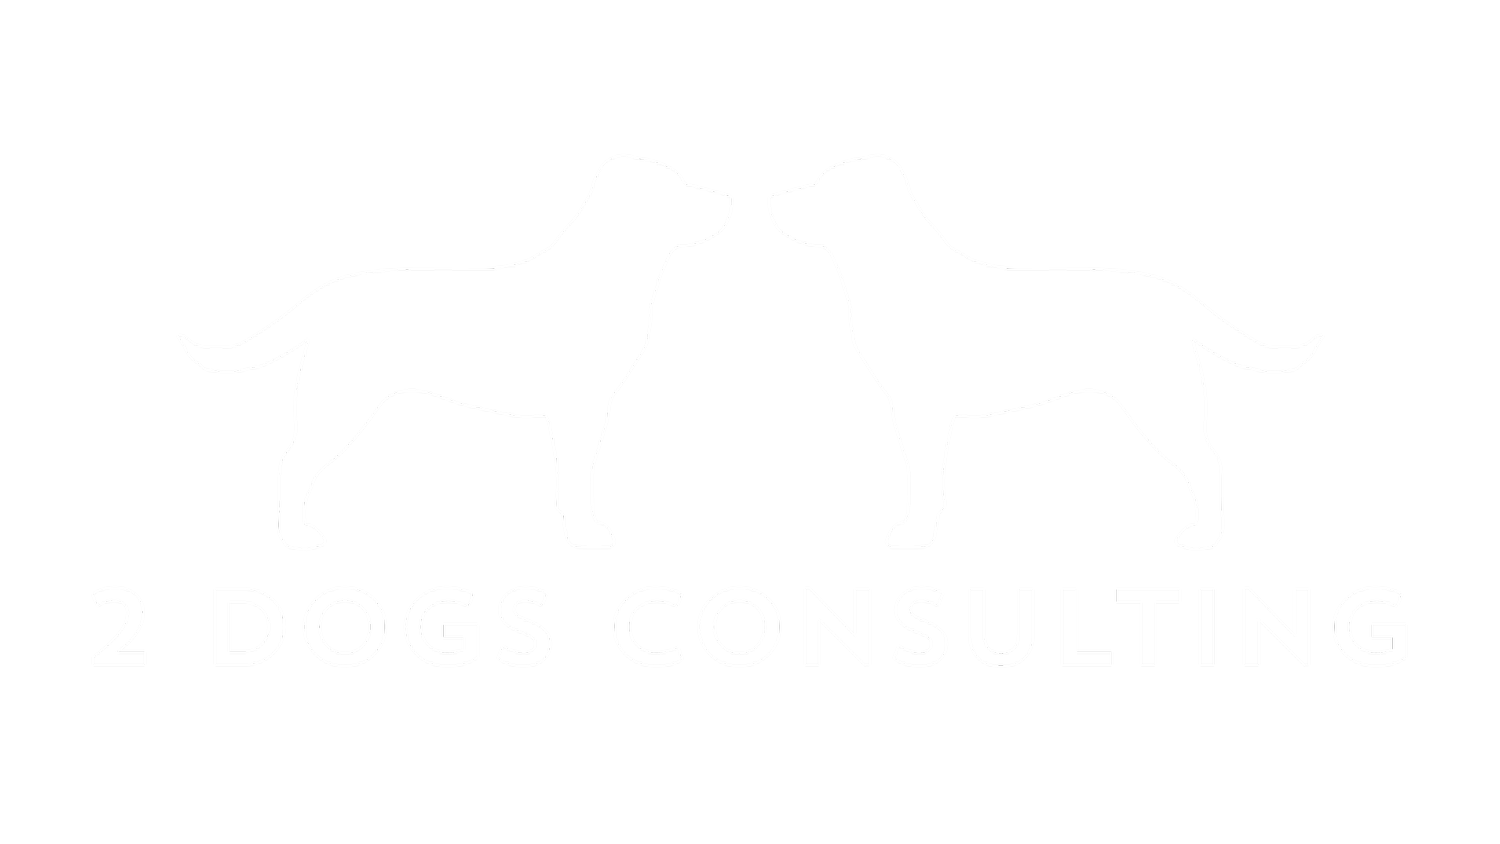 2 dogs consulting